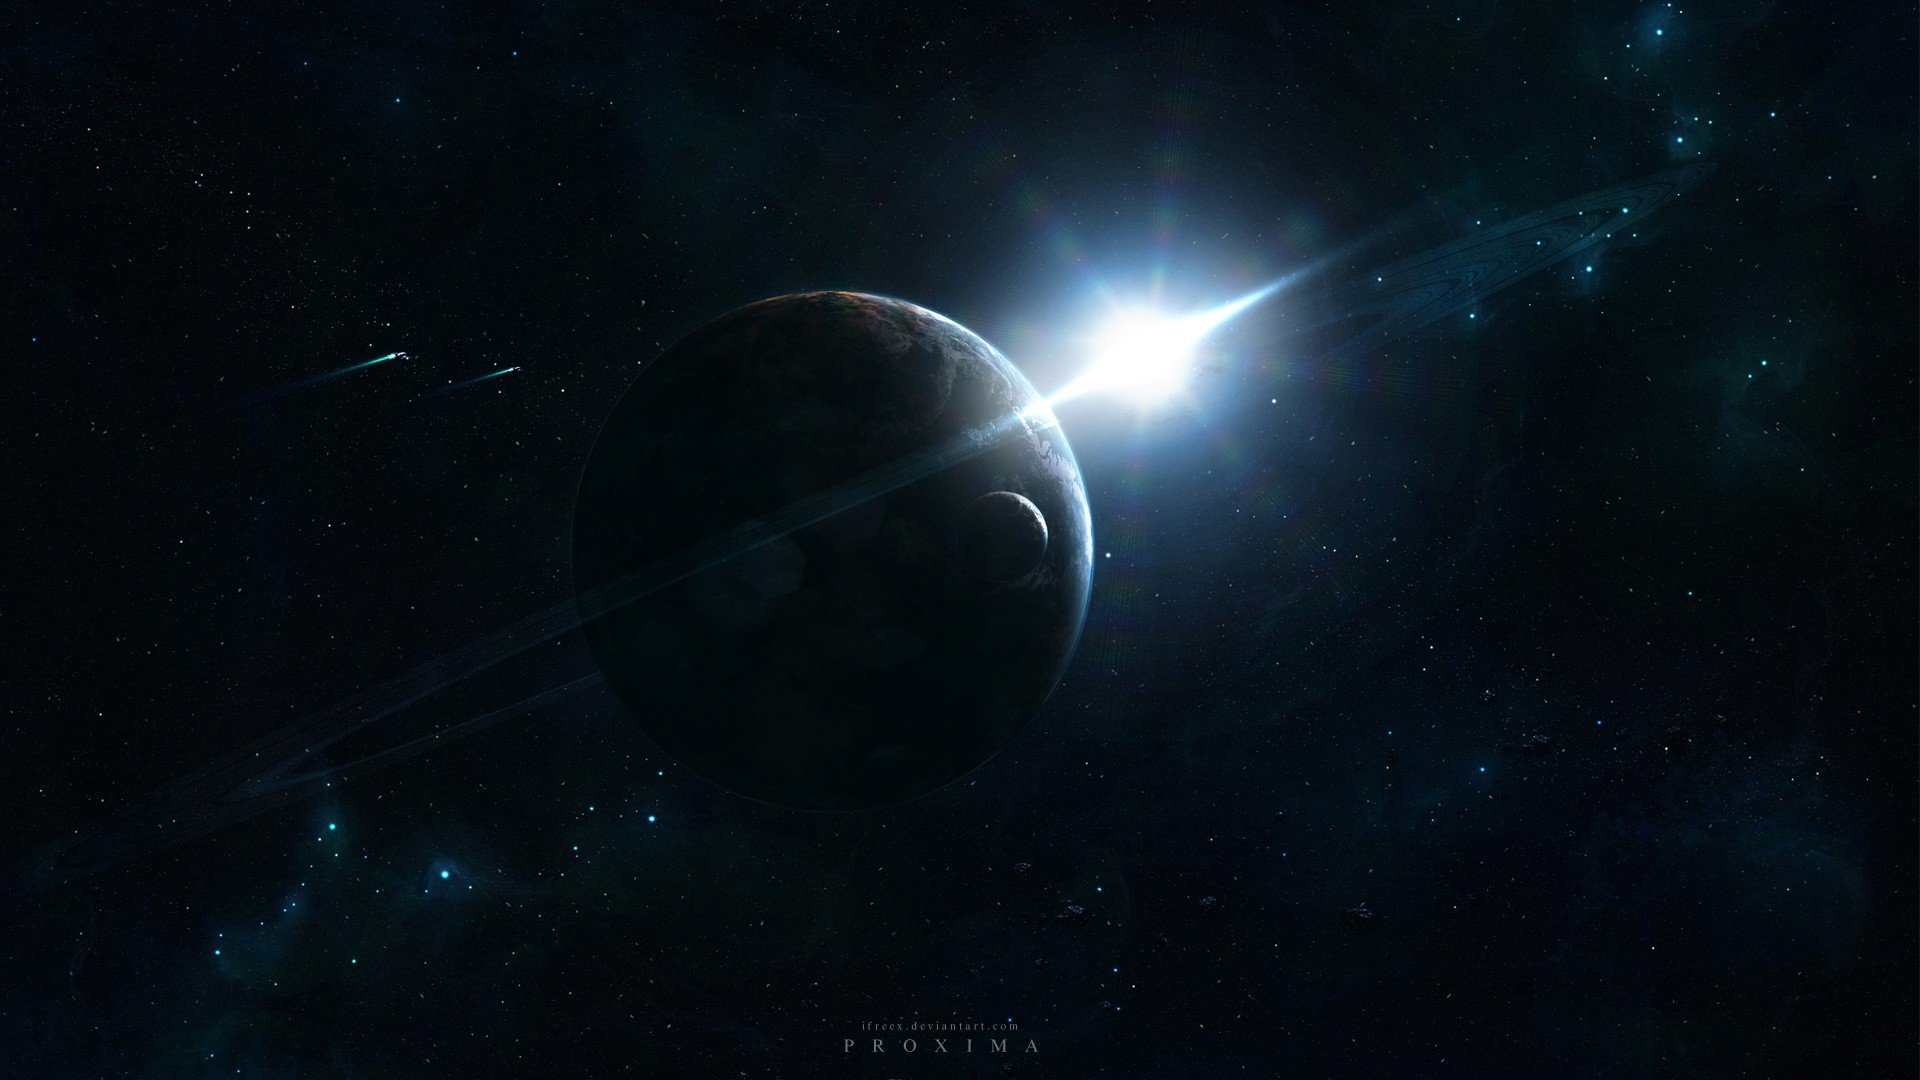 Sun, outer space, stars, planets, rings, spaceships - desktop wallpaper